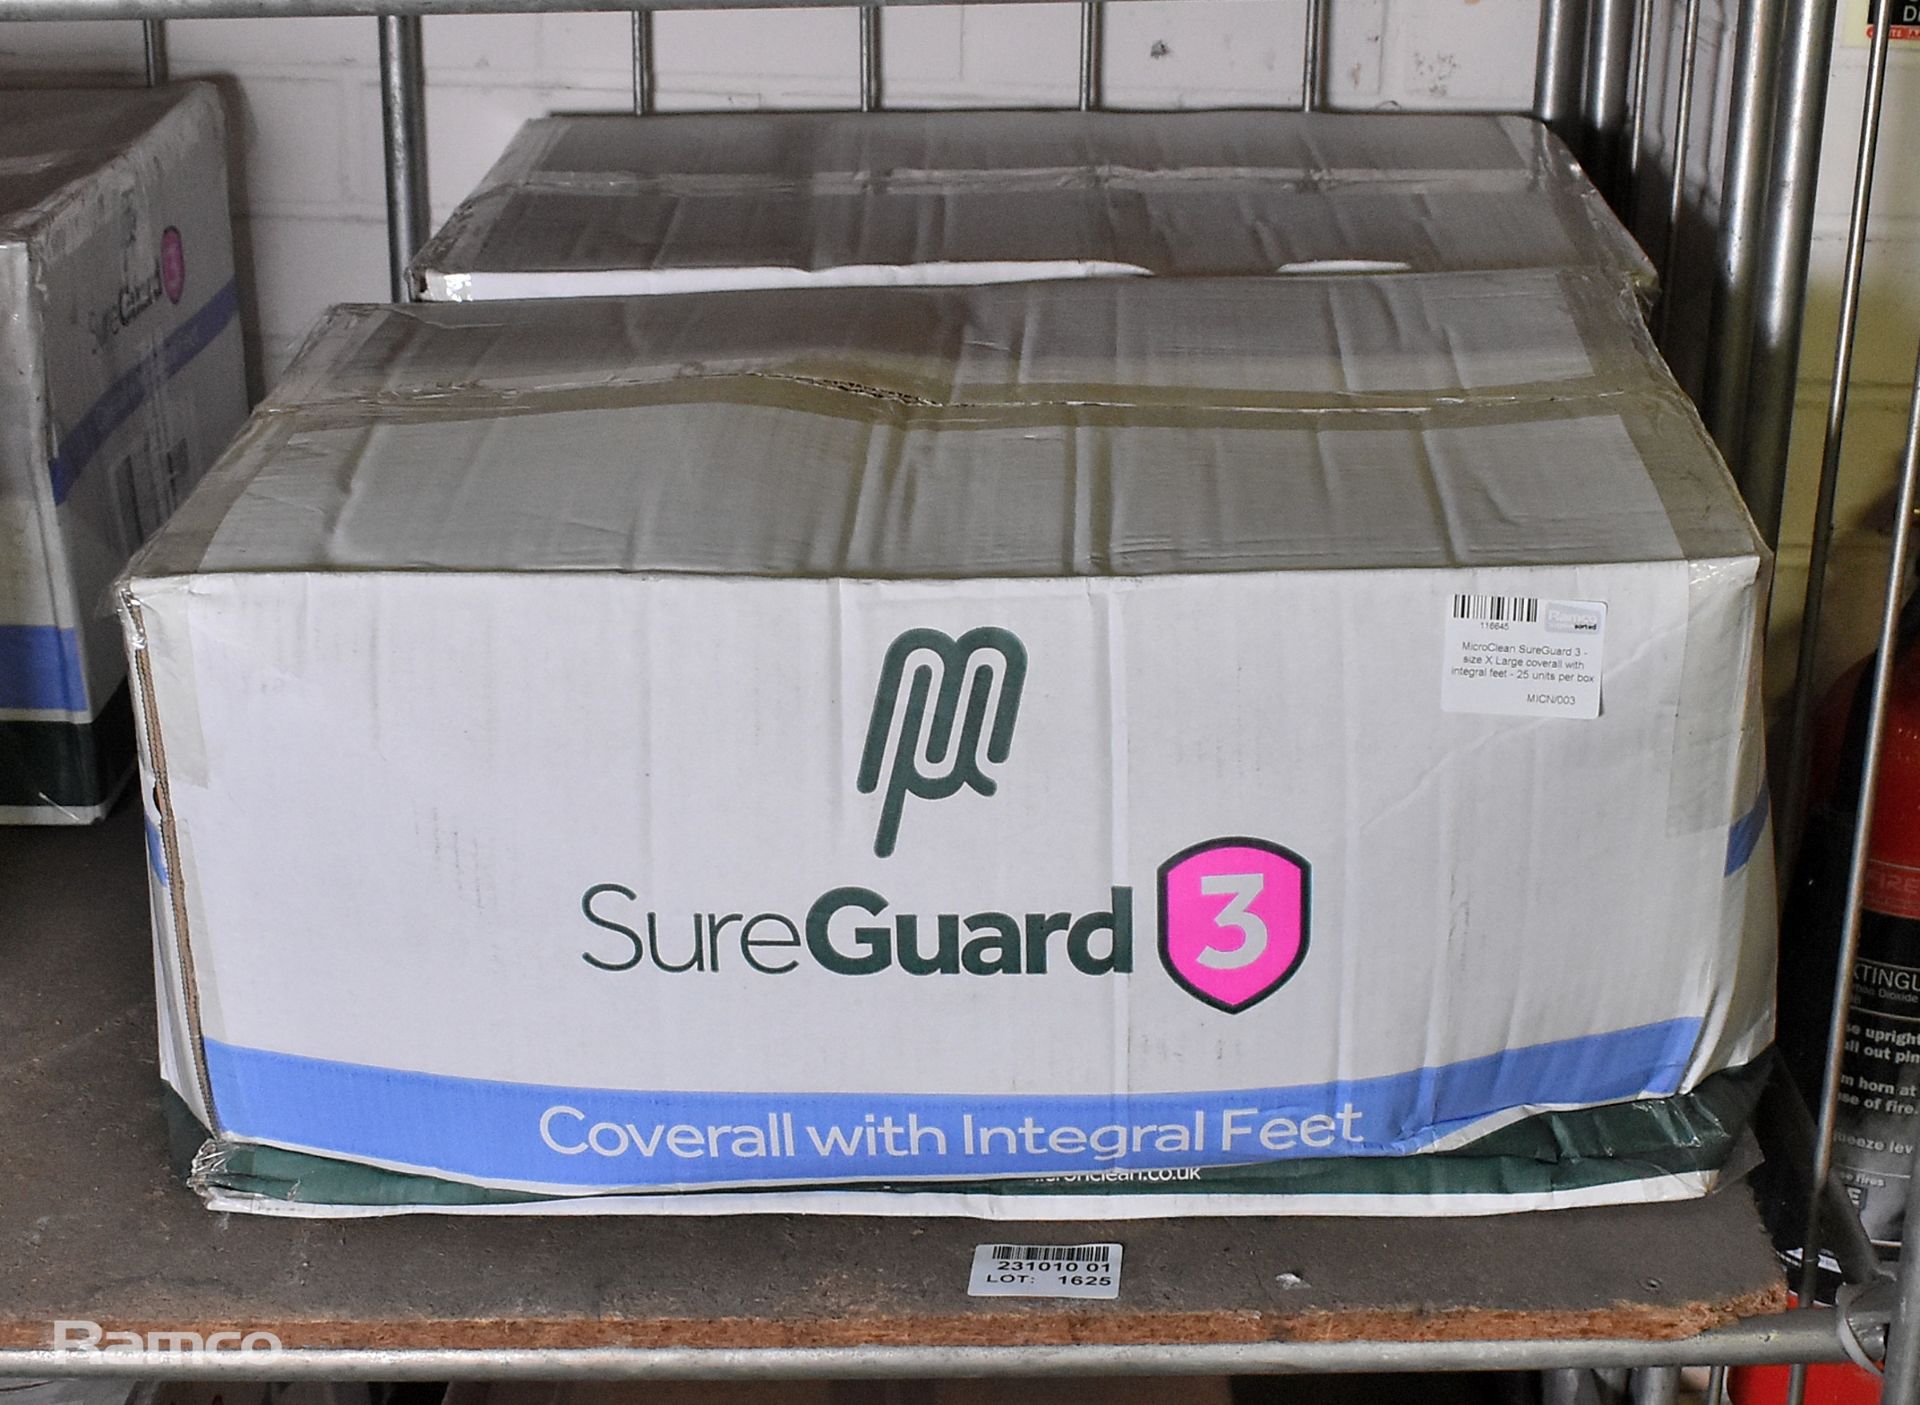 2x boxes of MicroClean SureGuard 3 coveralls with integral feet - size X Large - 25 units per box